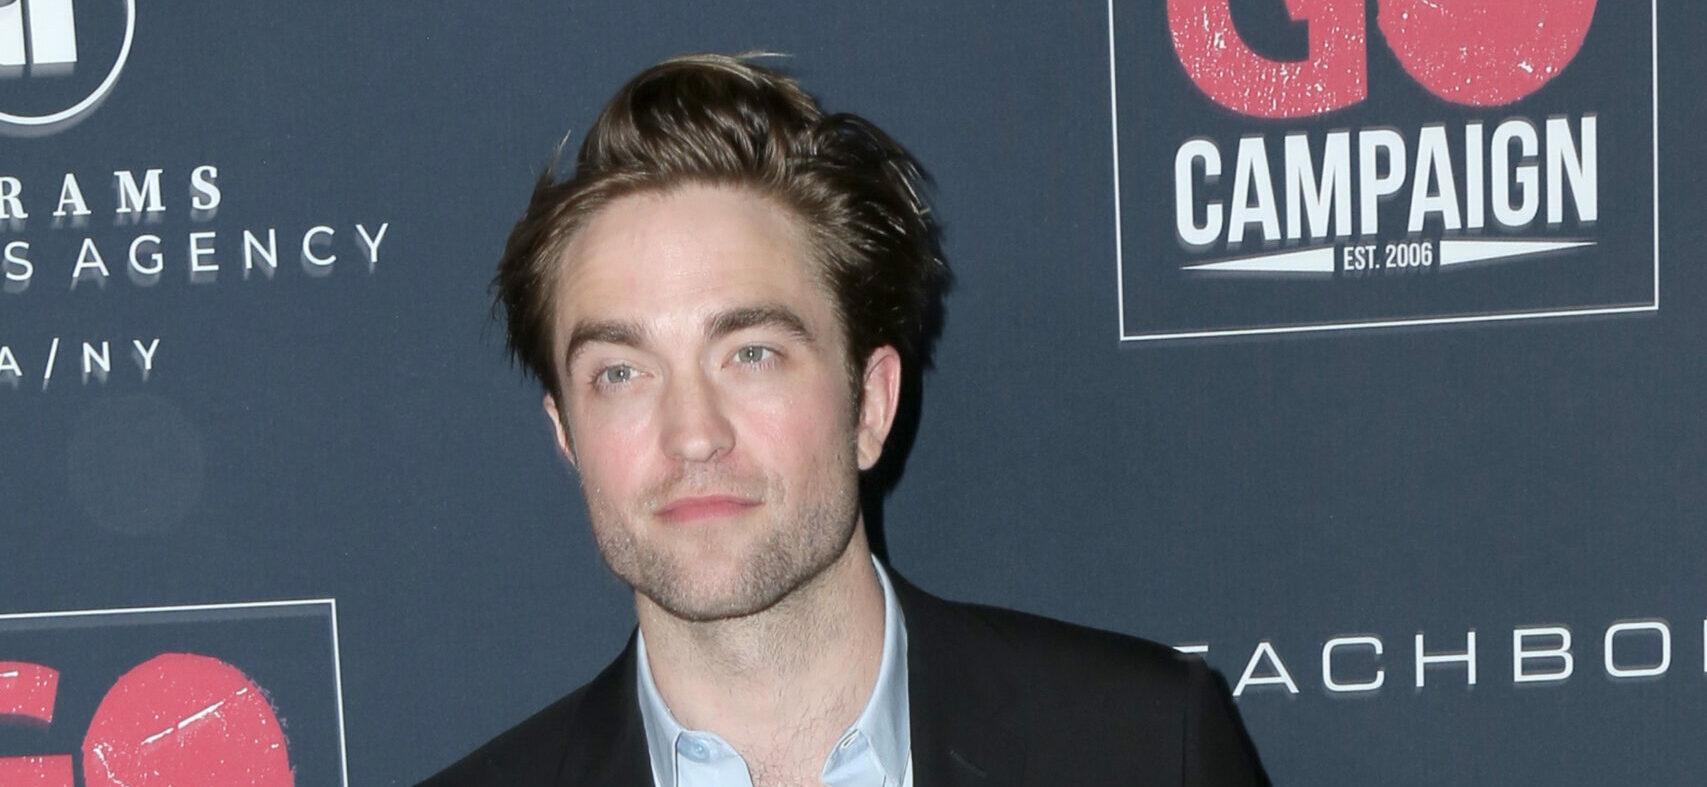 LOS ANGELES - NOV 16: Robert Pattinson at the Go Campaign’s 13th Annual Go Gala at the NeueHouse on November 16, 2019 in Los Angeles, CA Newscom